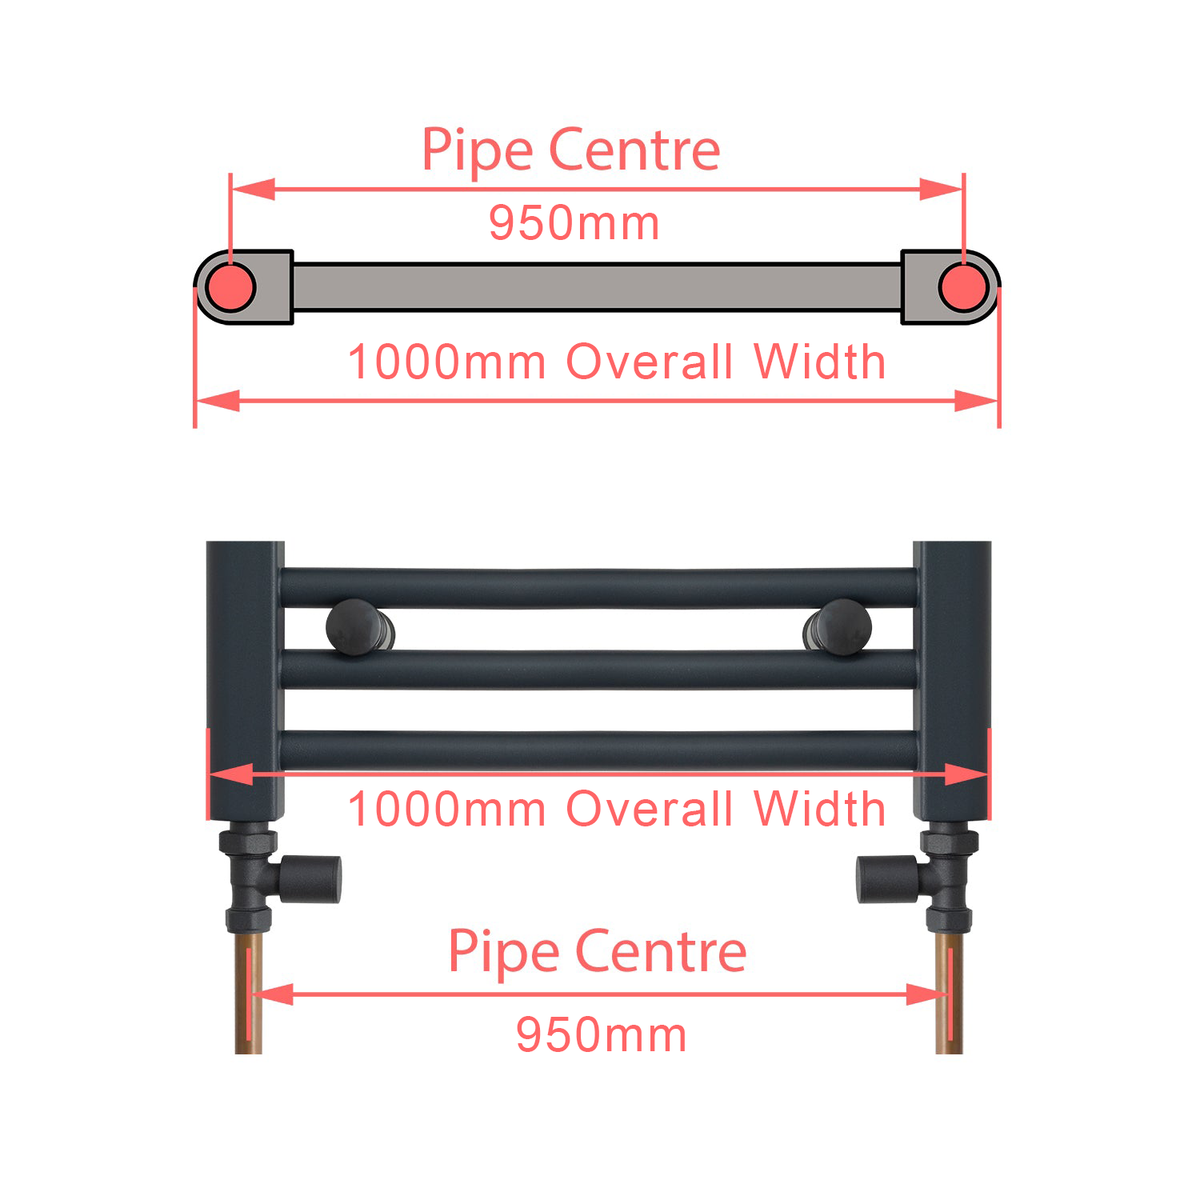 700 mm High x 1000 mm Wide Heated Straight Towel Rail Radiator Pipe Centre / Axis 950mm diagram